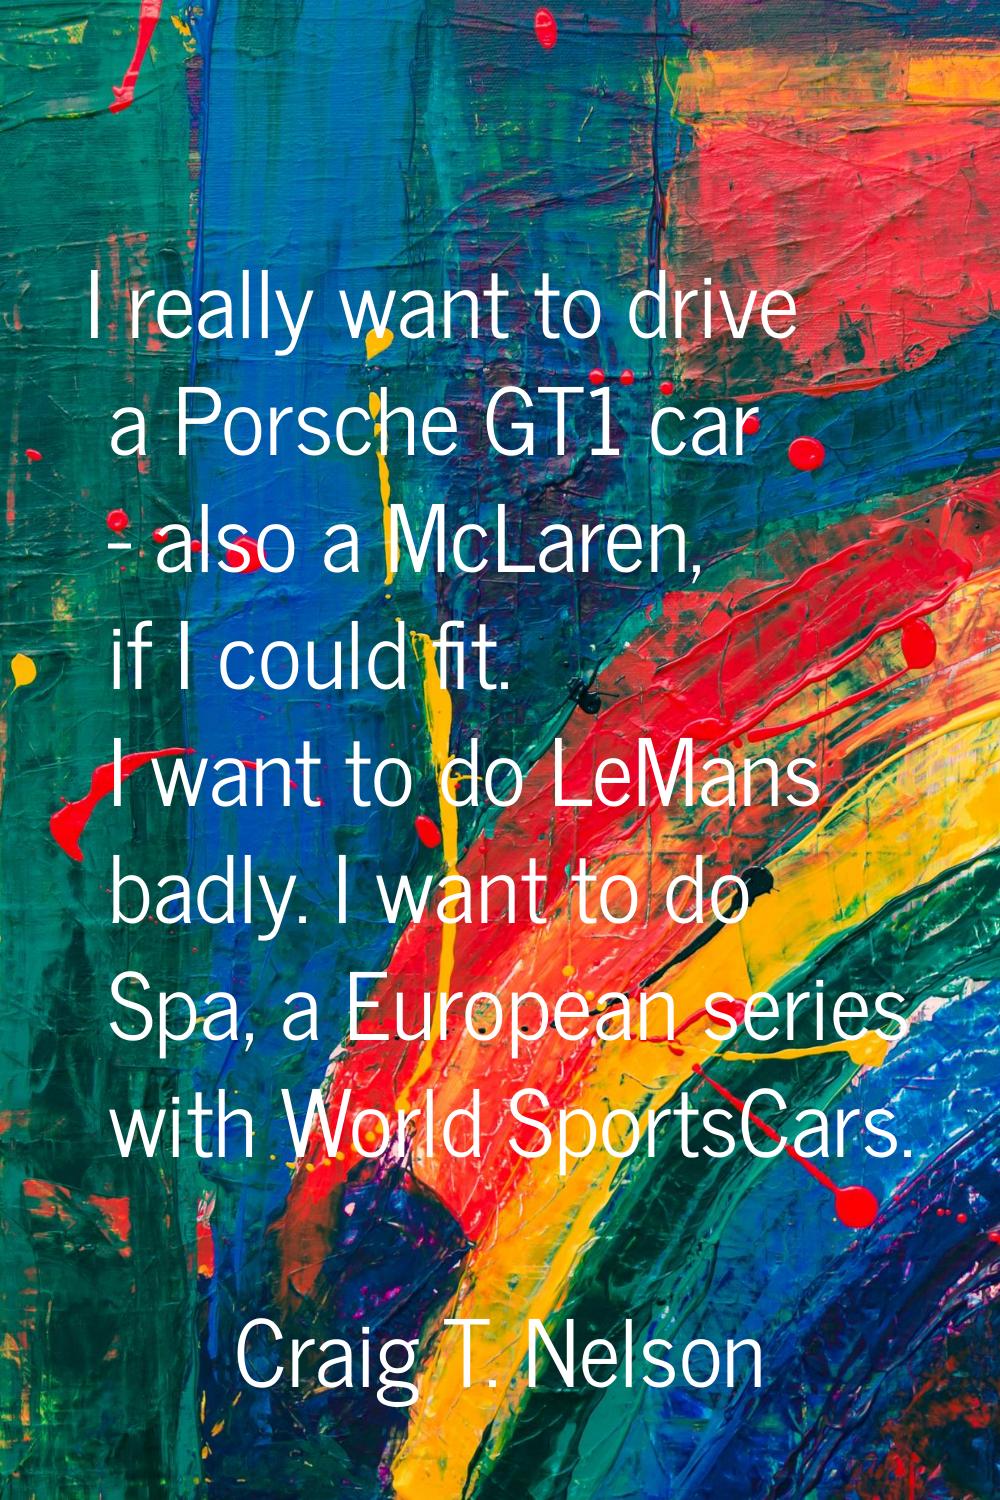 I really want to drive a Porsche GT1 car - also a McLaren, if I could fit. I want to do LeMans badl